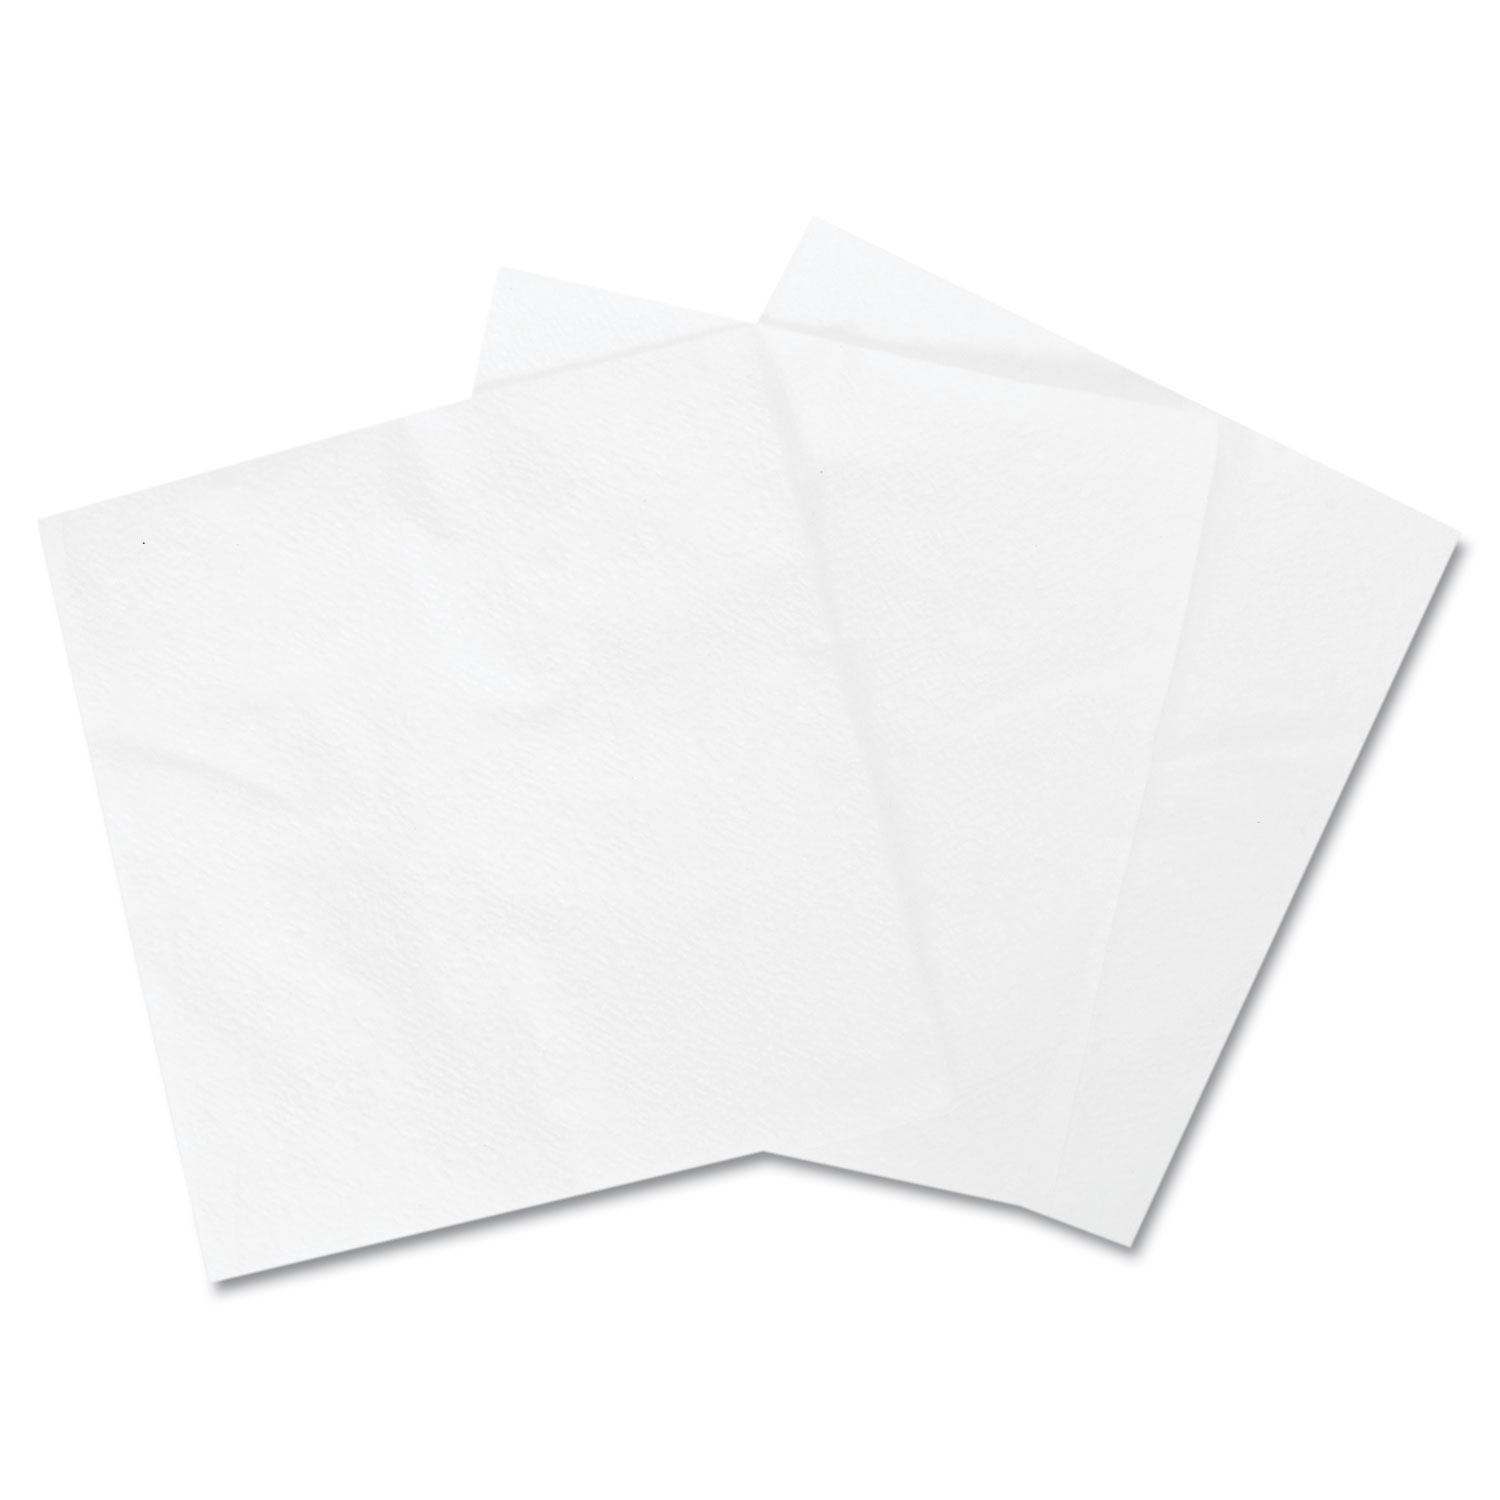 1/4-Fold Lunch Napkins, 1-Ply, 13